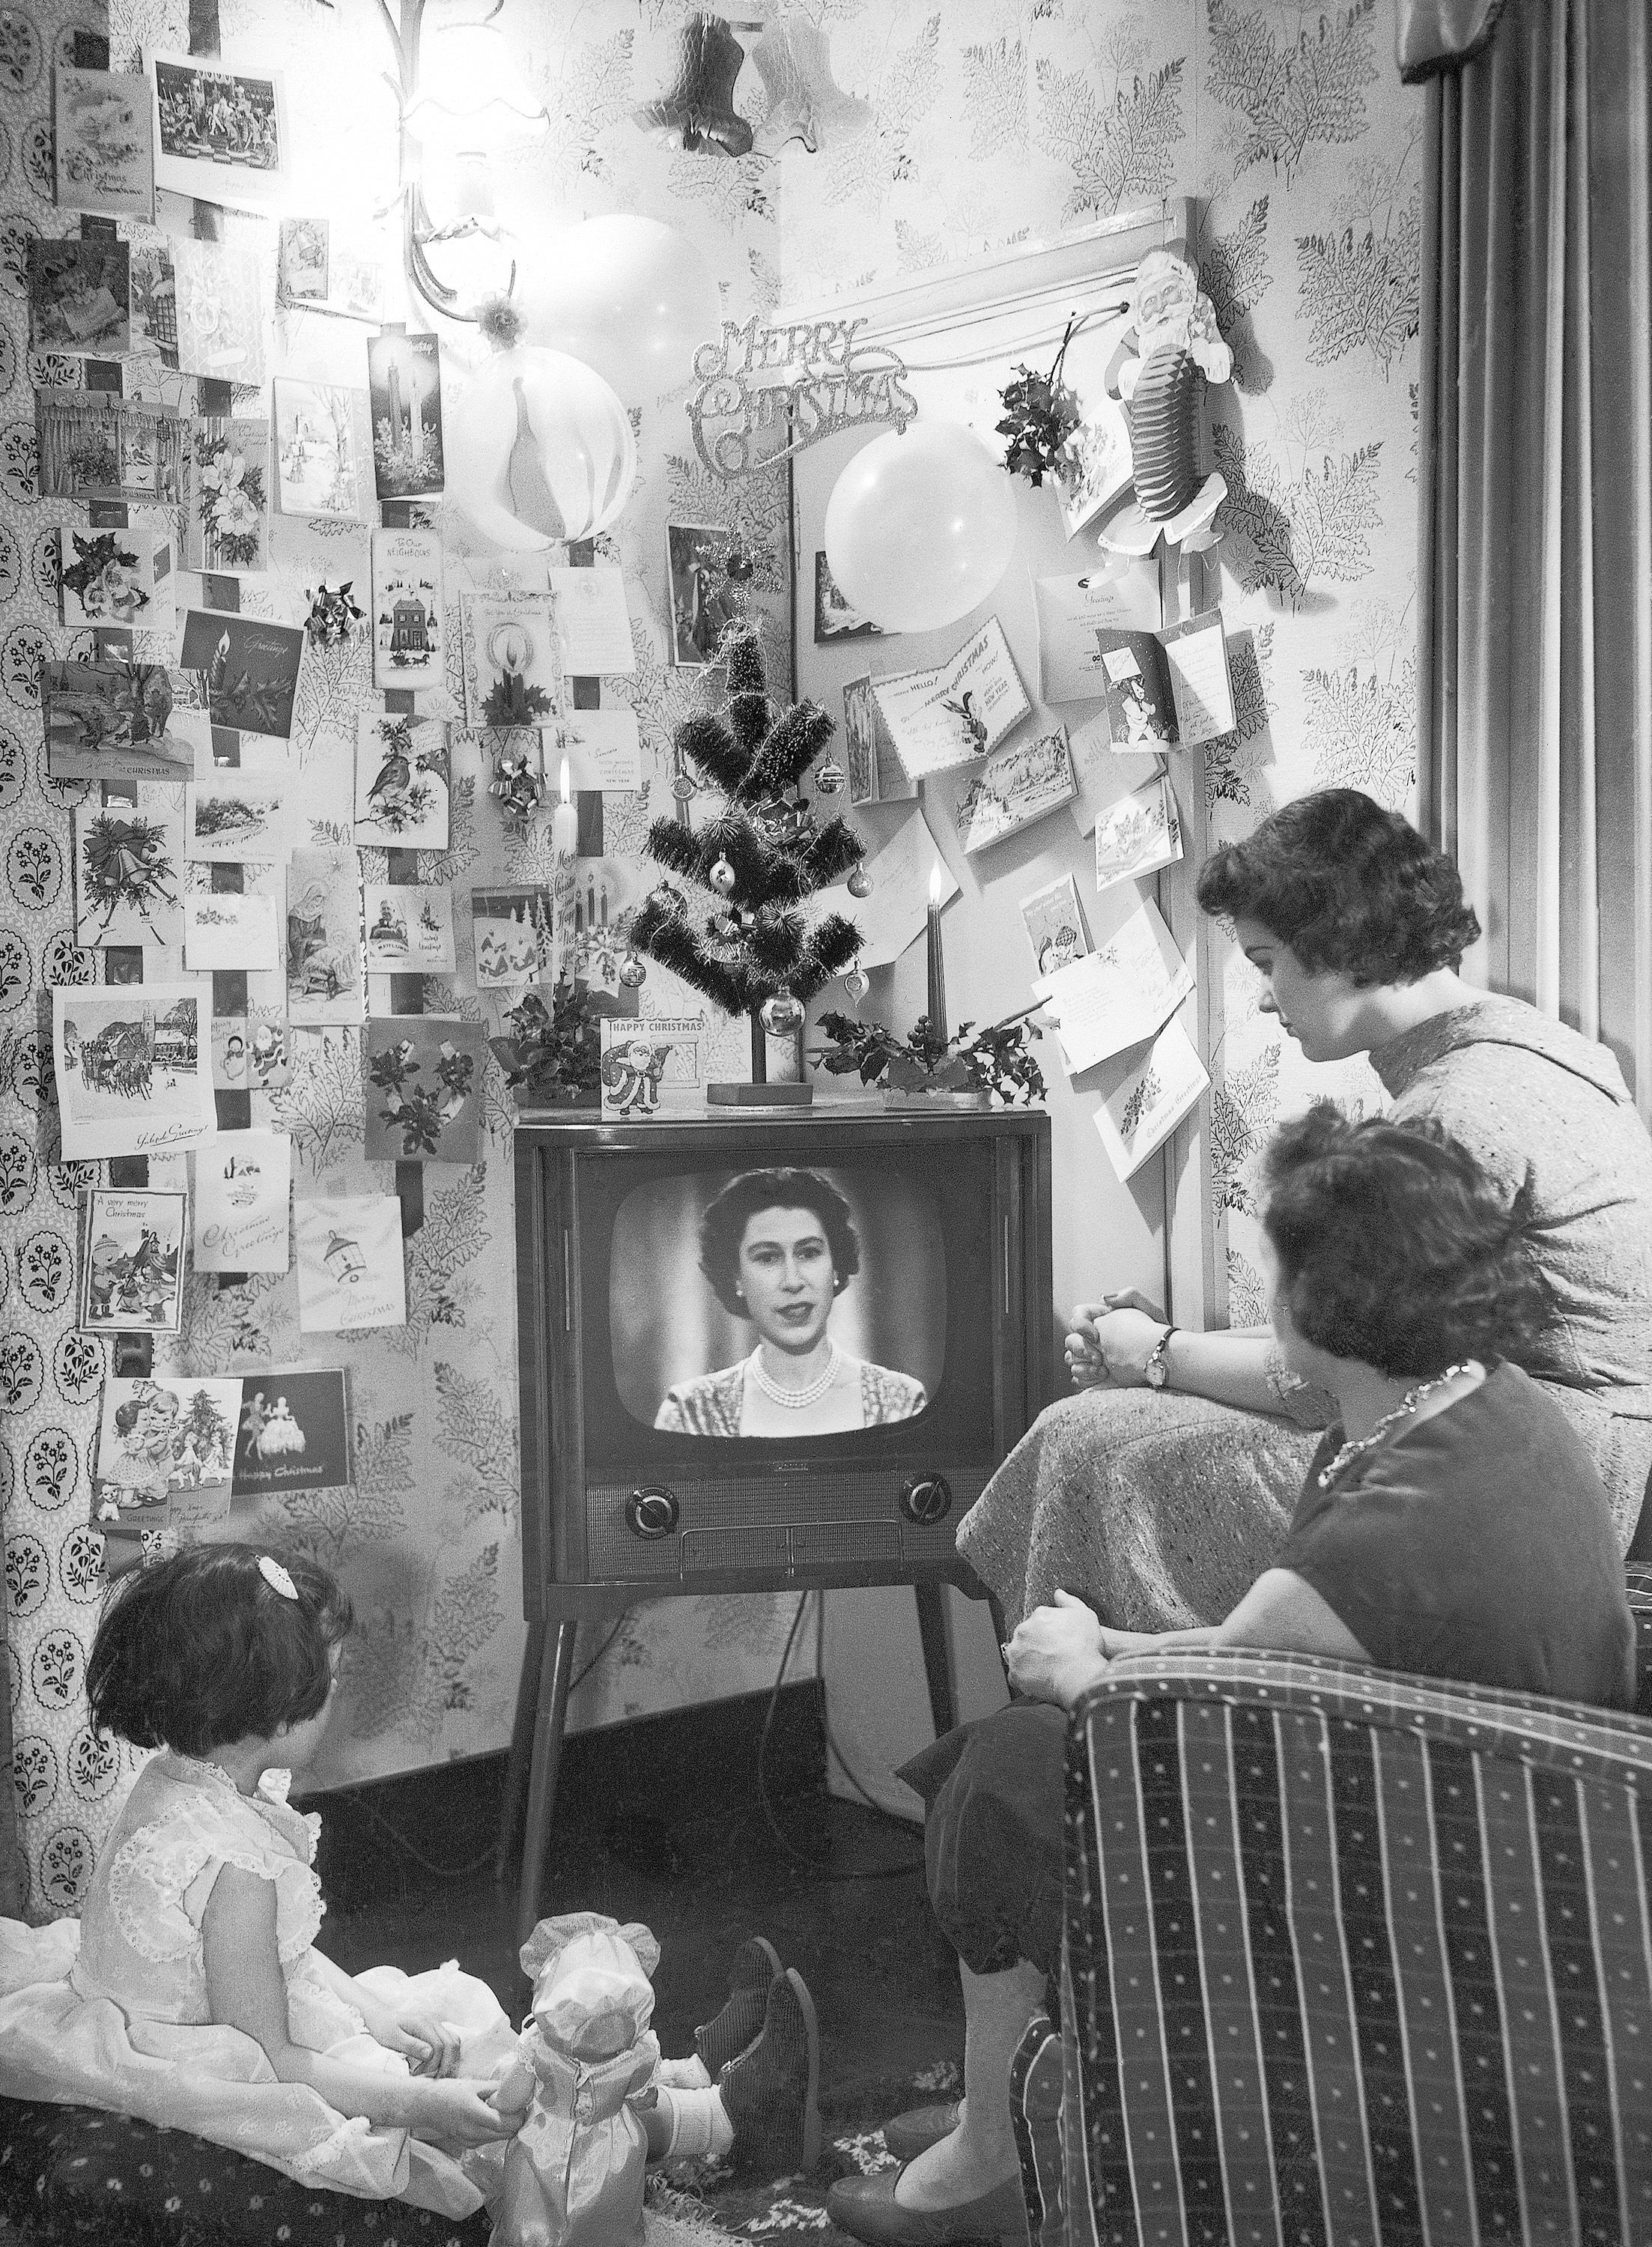 A family watch as Britain's Queen Elizabeth II makes her first televised Christmas broadcast on 25 December, 1957